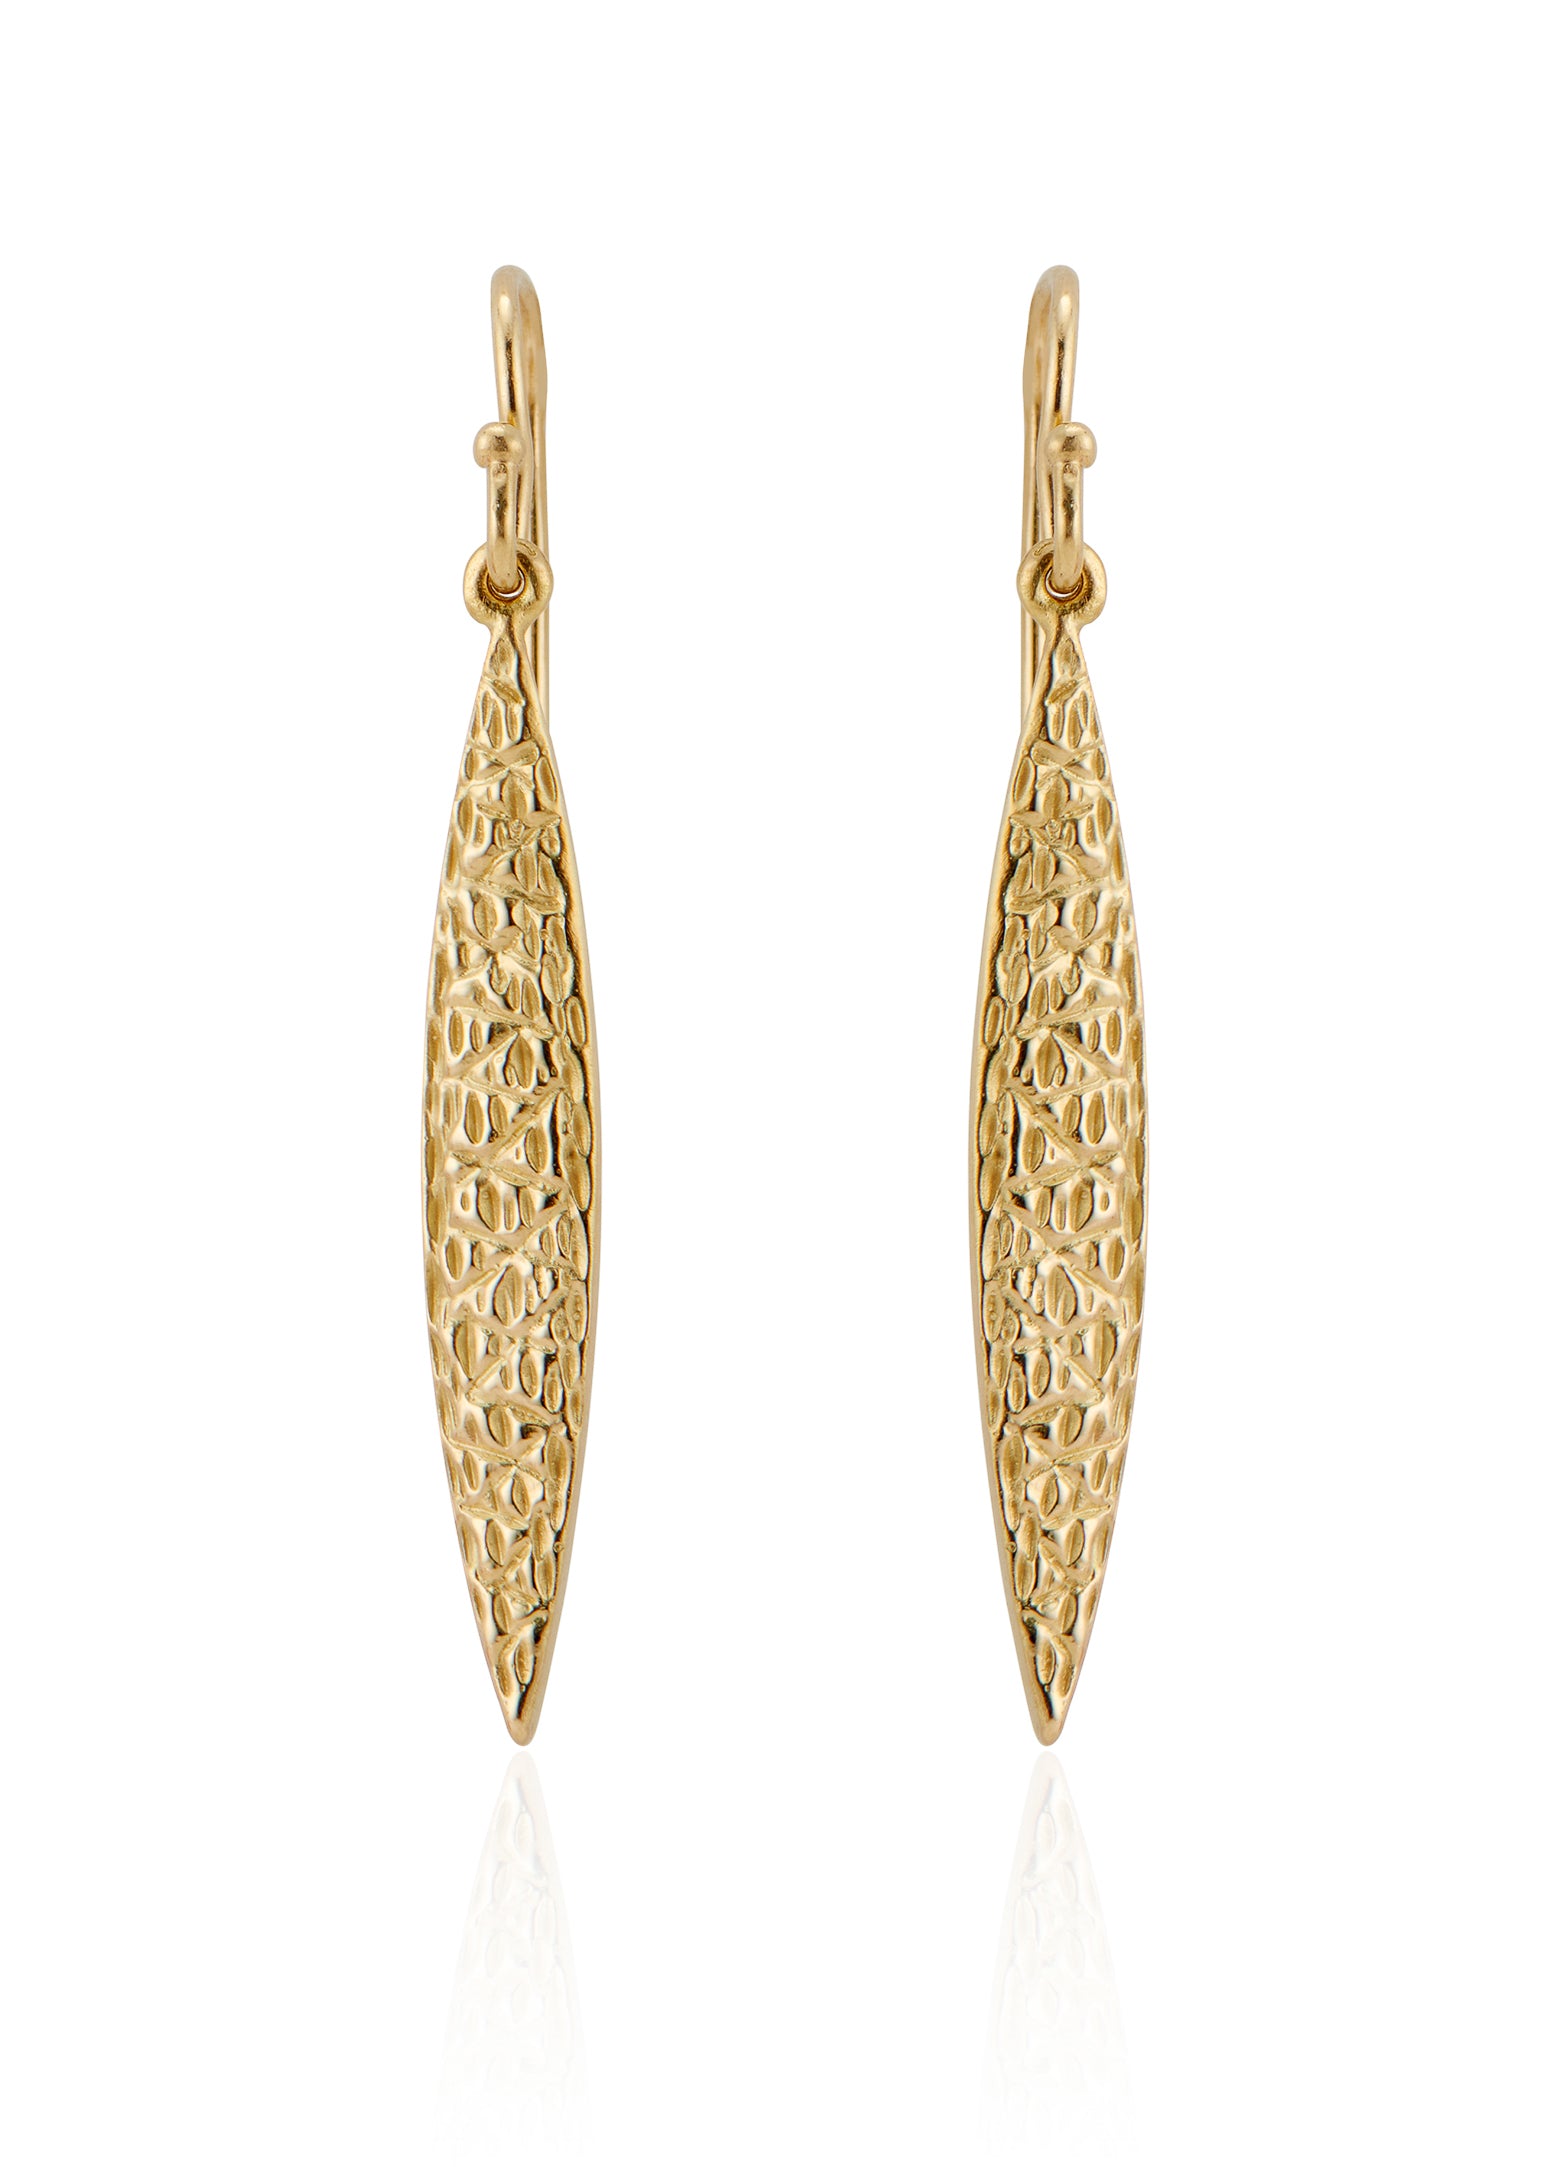 Inspired by the sacred tree of protection which shares its name, the Linden earring slopes gracefully into an elongated point, its delicate details mirroring the weathered bark of the tree that offers shelter to those who seek it. 